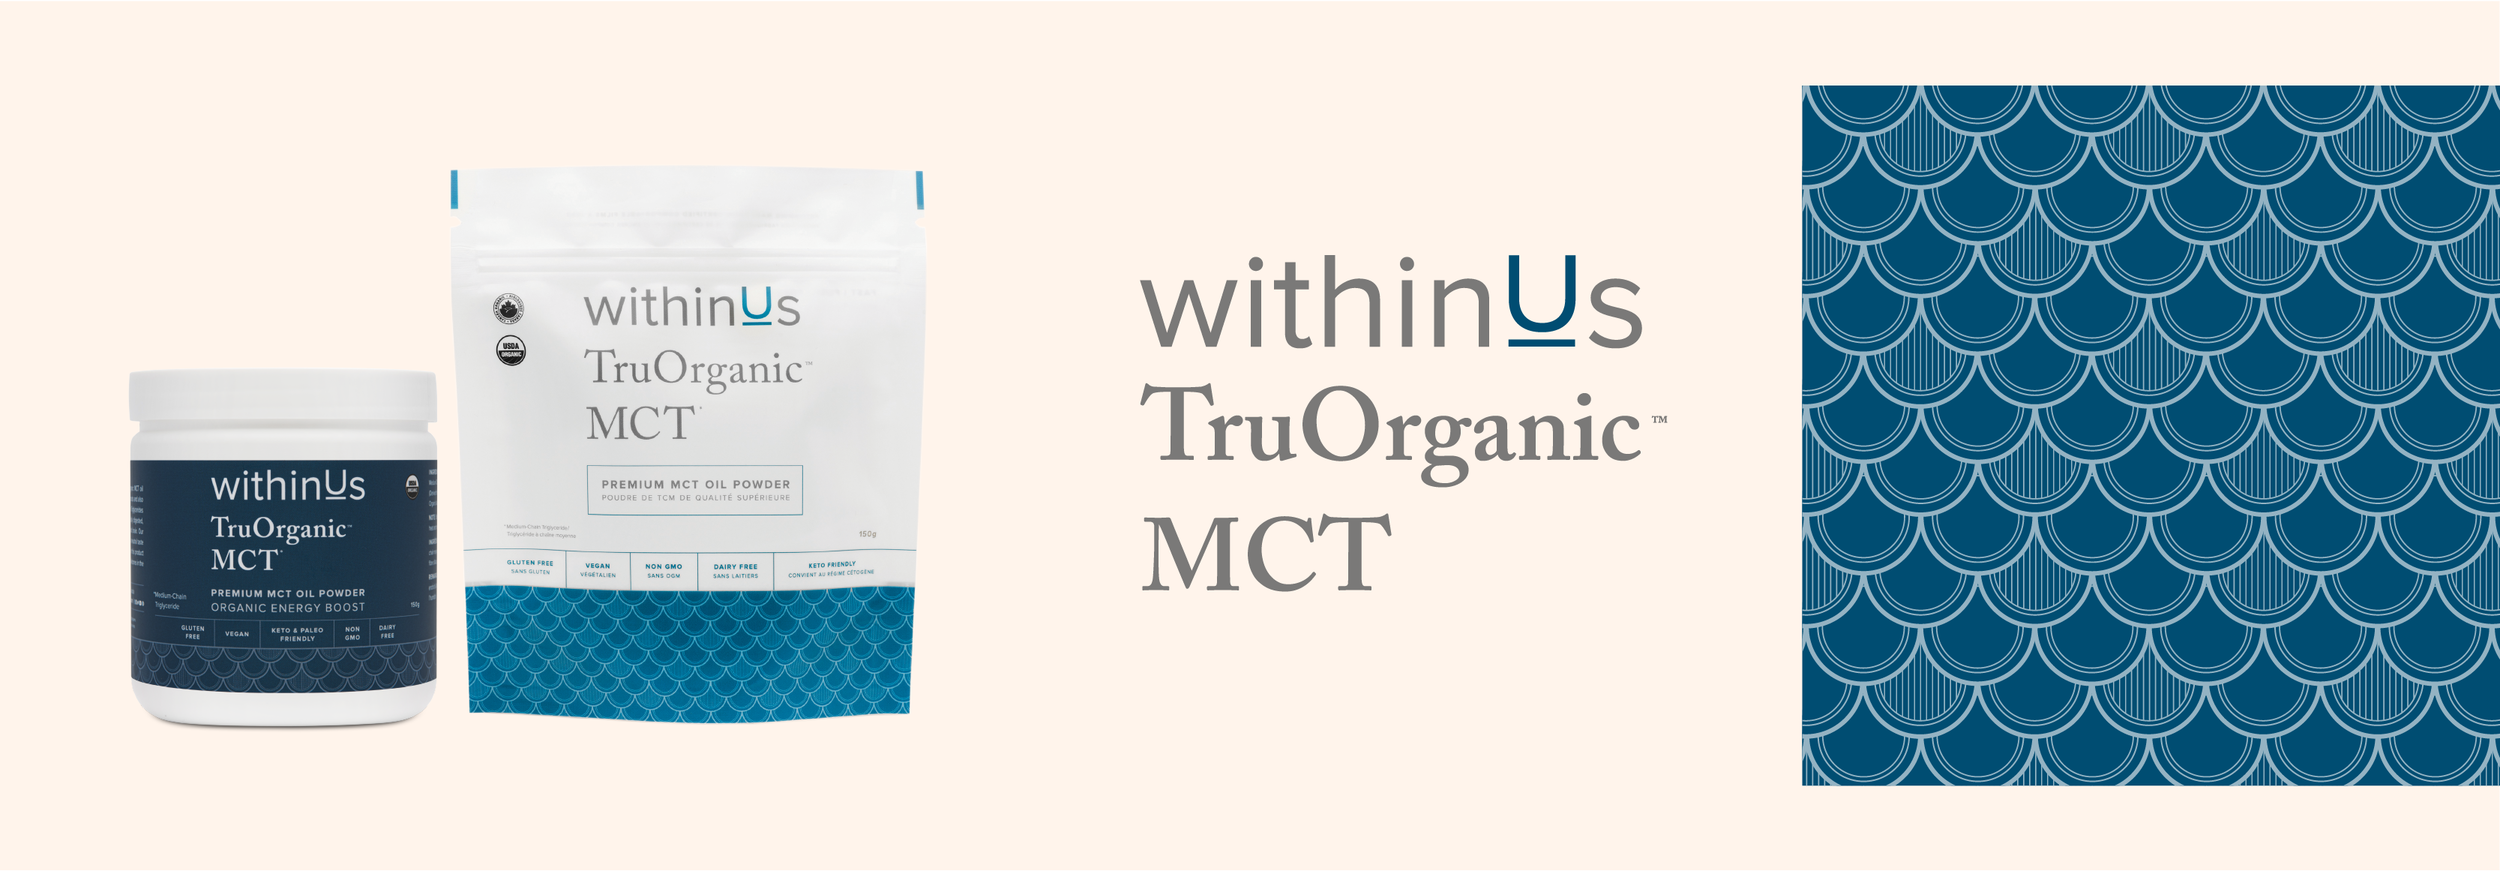 withinUs-Product-Design_TruOrganic_MCT.png